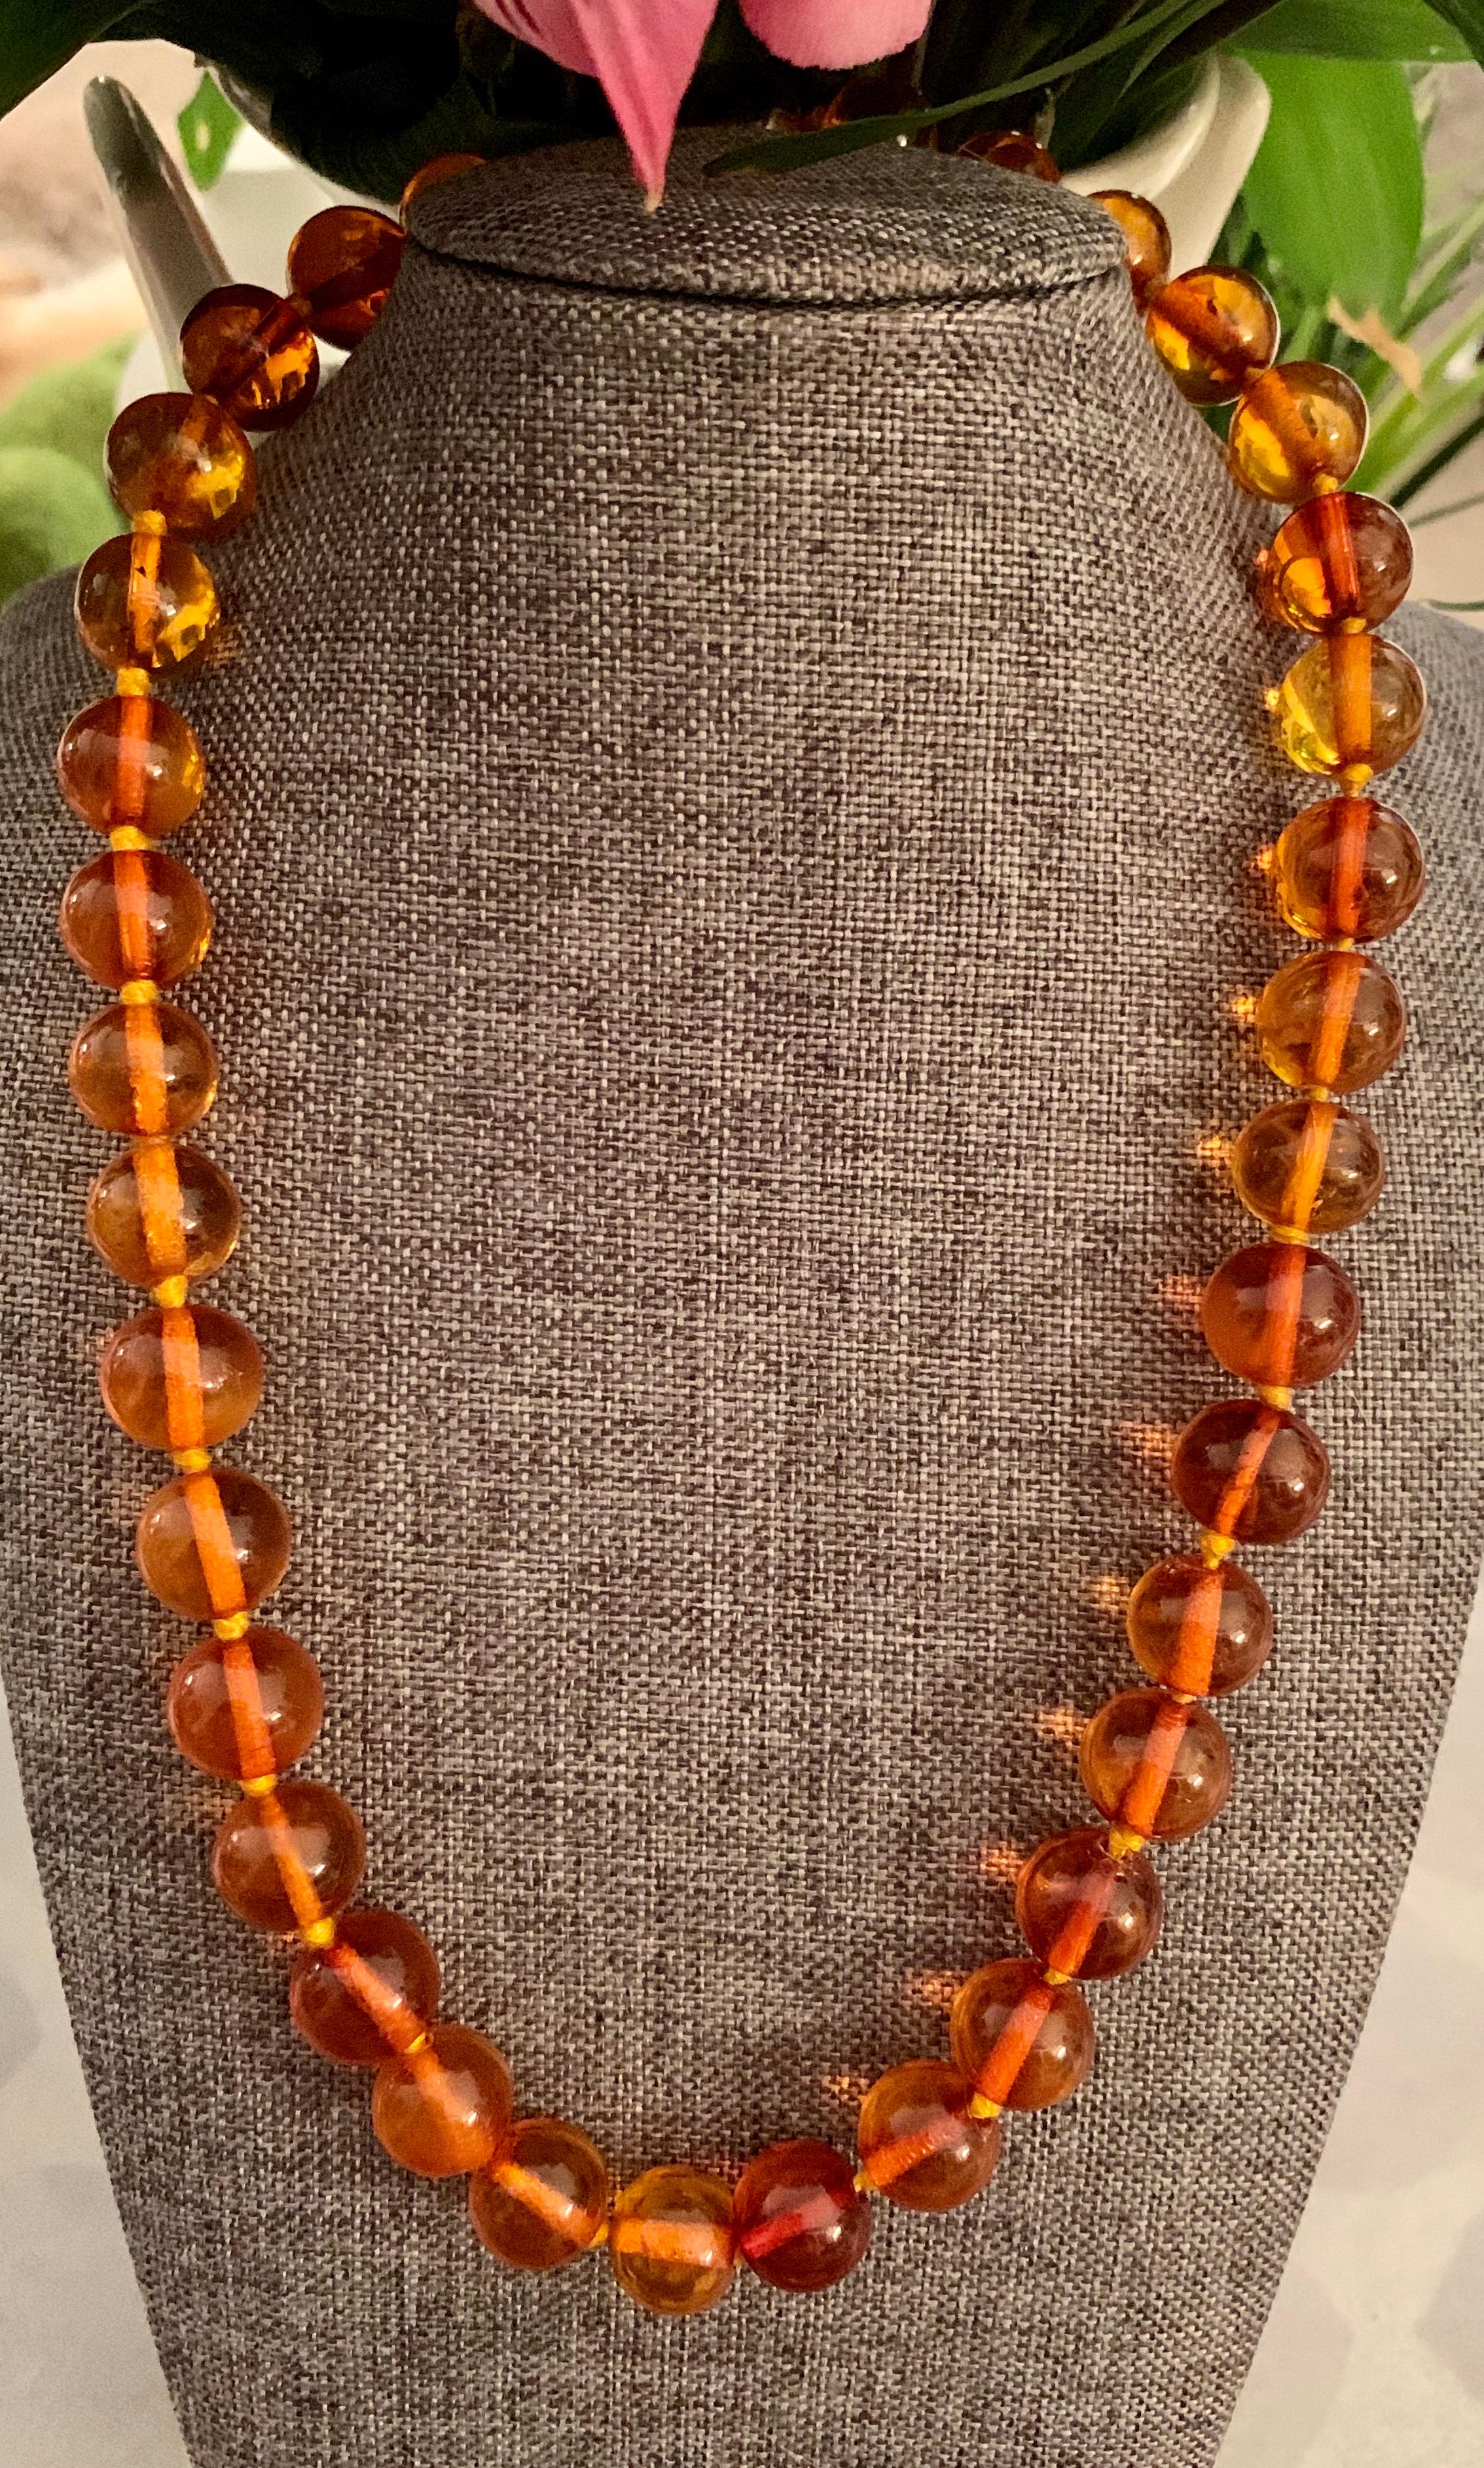 Women's Vintage Amber Bead Necklace with Gold Filled Clasp